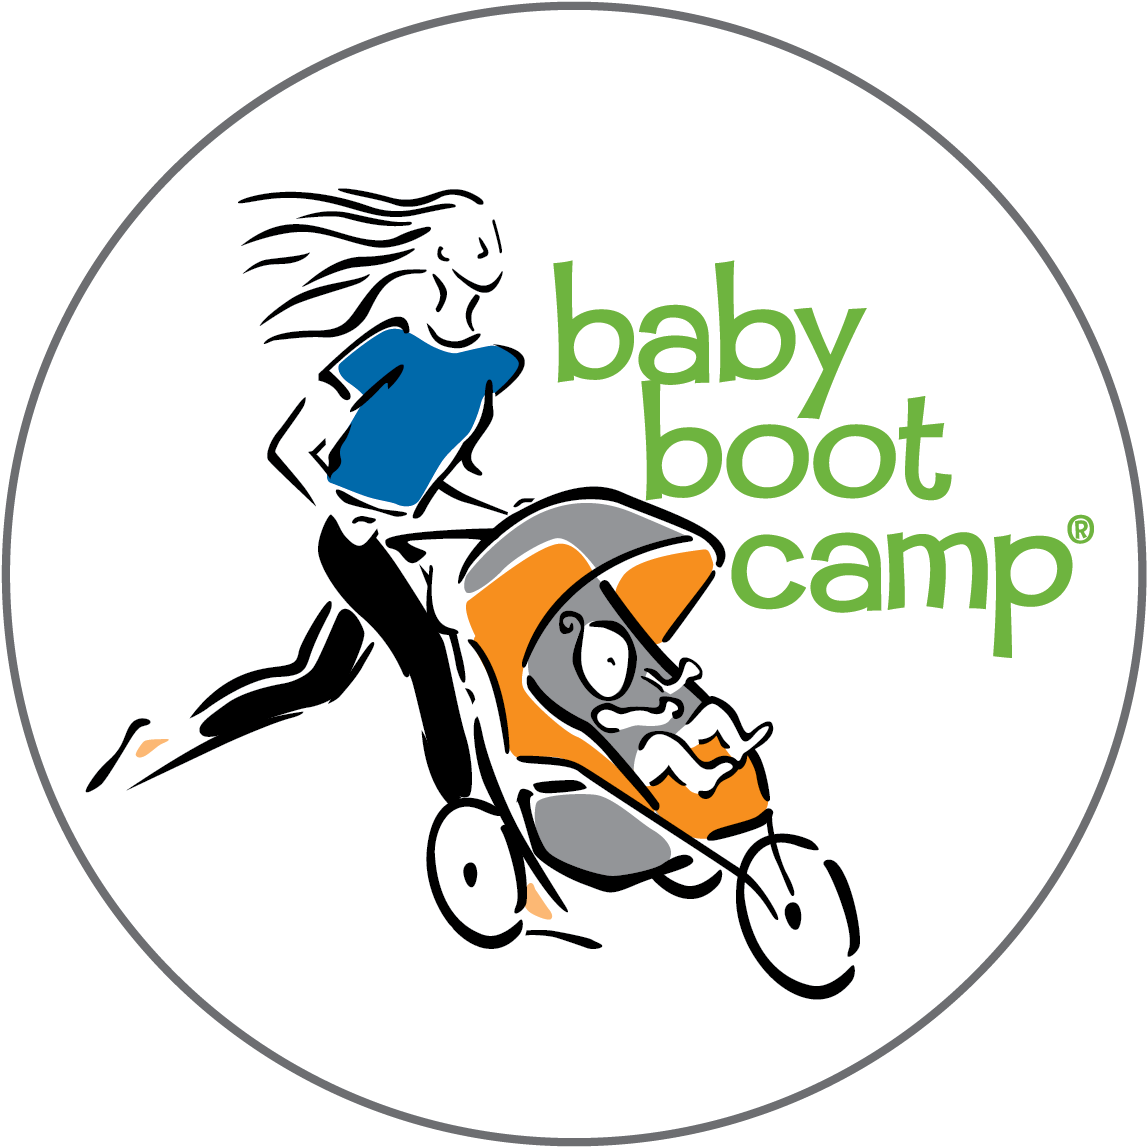 Most Of Our Owners Are Young Moms Making A Career Change - Baby Boot Camp (1200x1200)